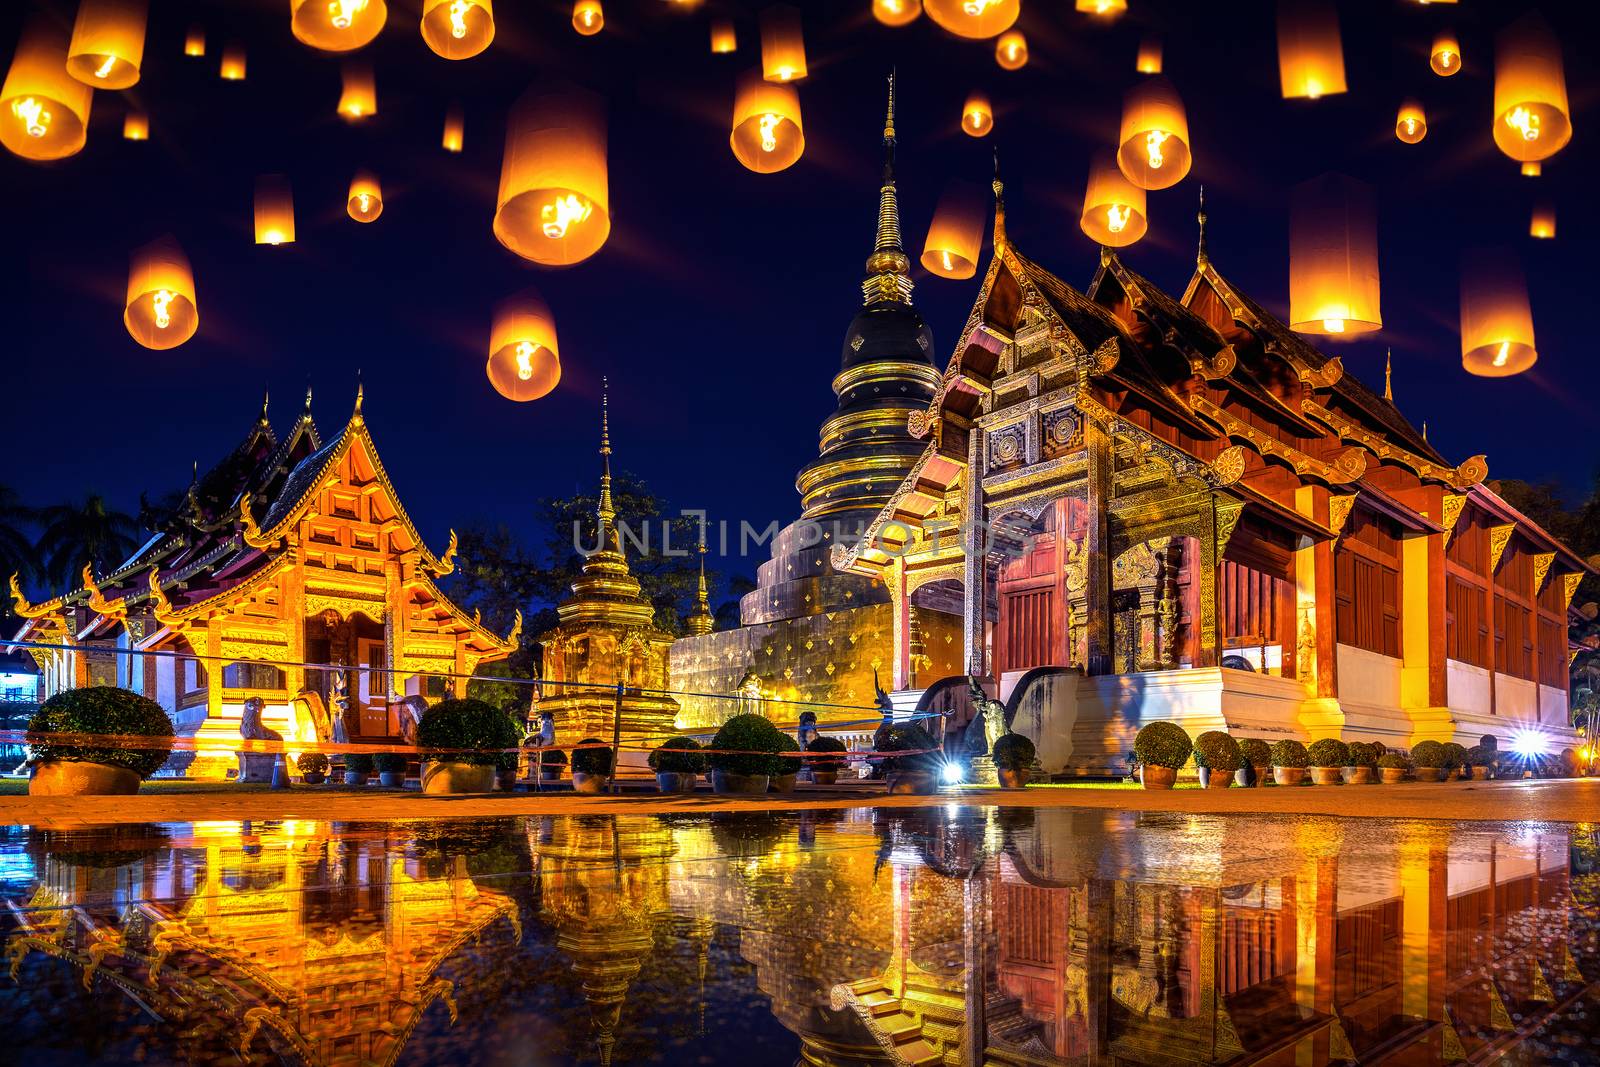 Yee peng festival and sky lanterns at Wat Phra Singh temple at night in Chiang mai, Thailand. by gutarphotoghaphy